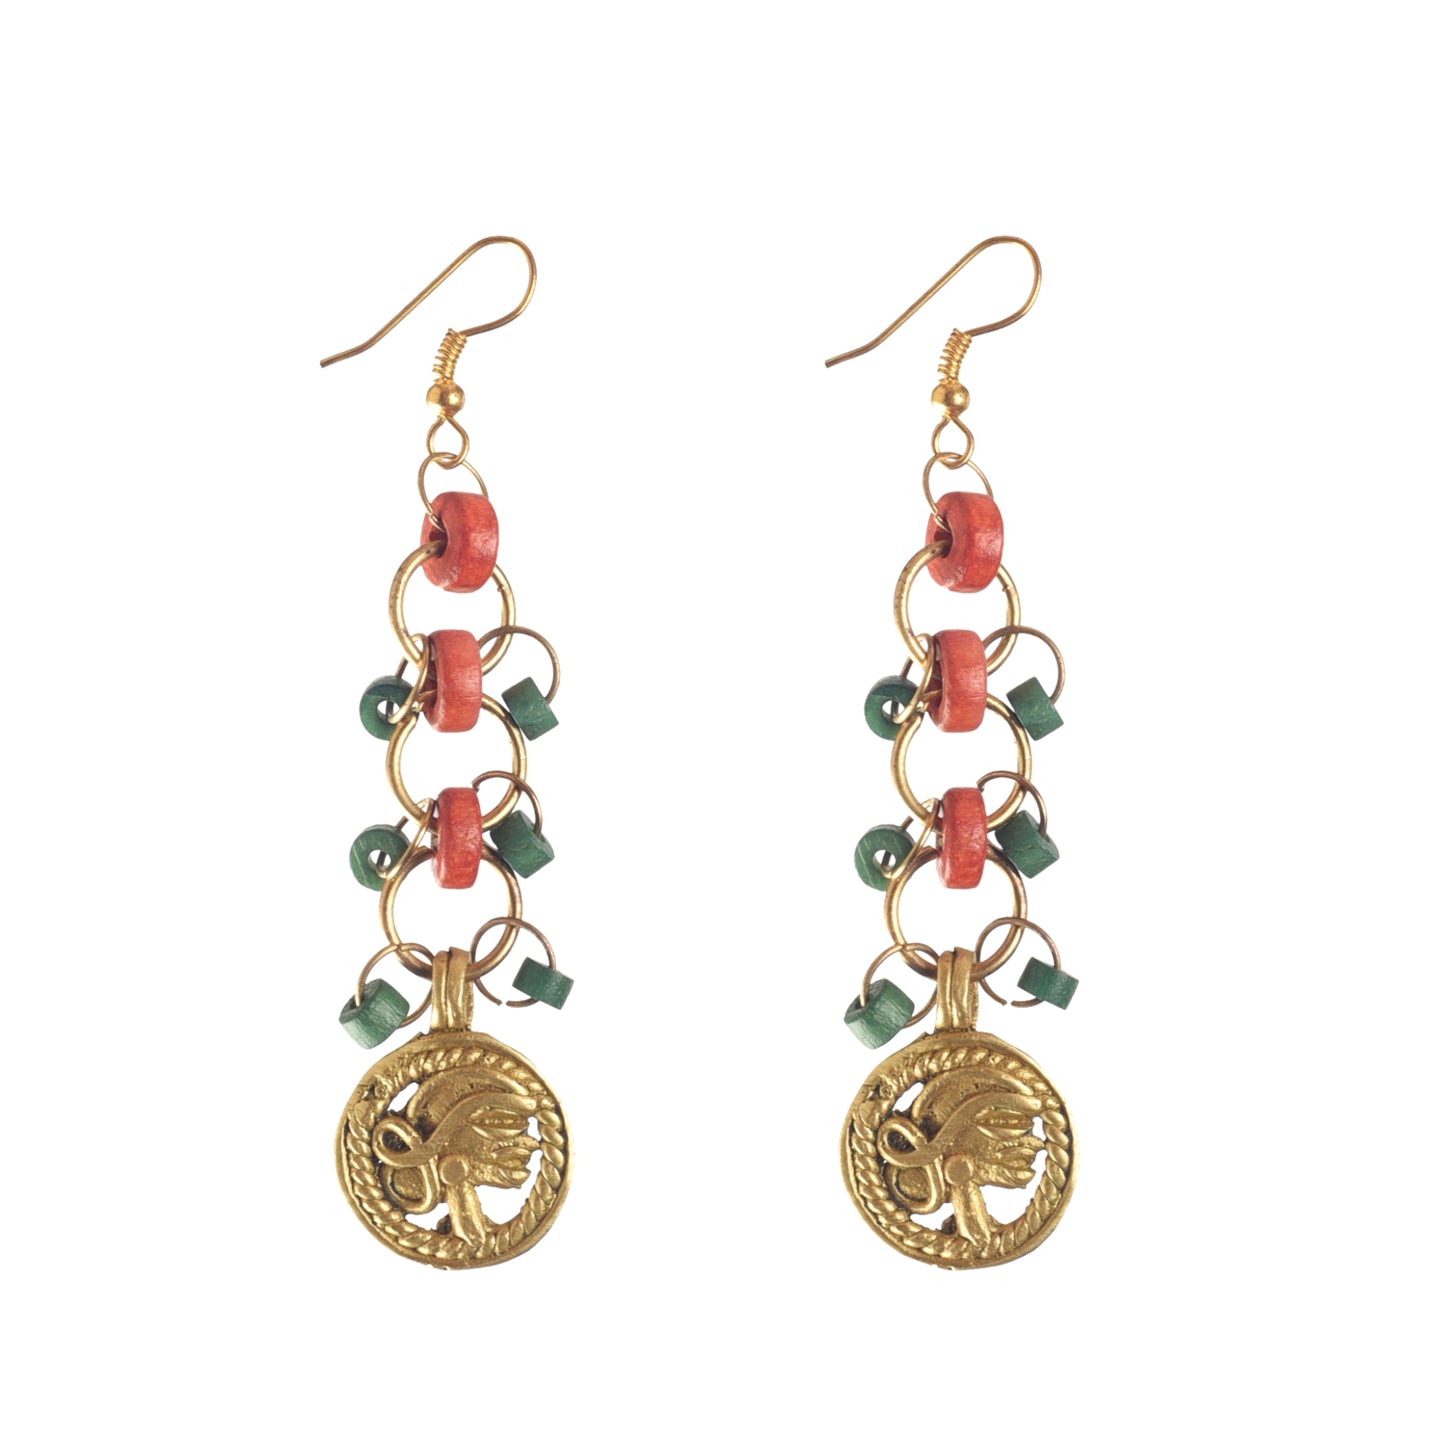 The Sun Queen Handcrafted Earrings